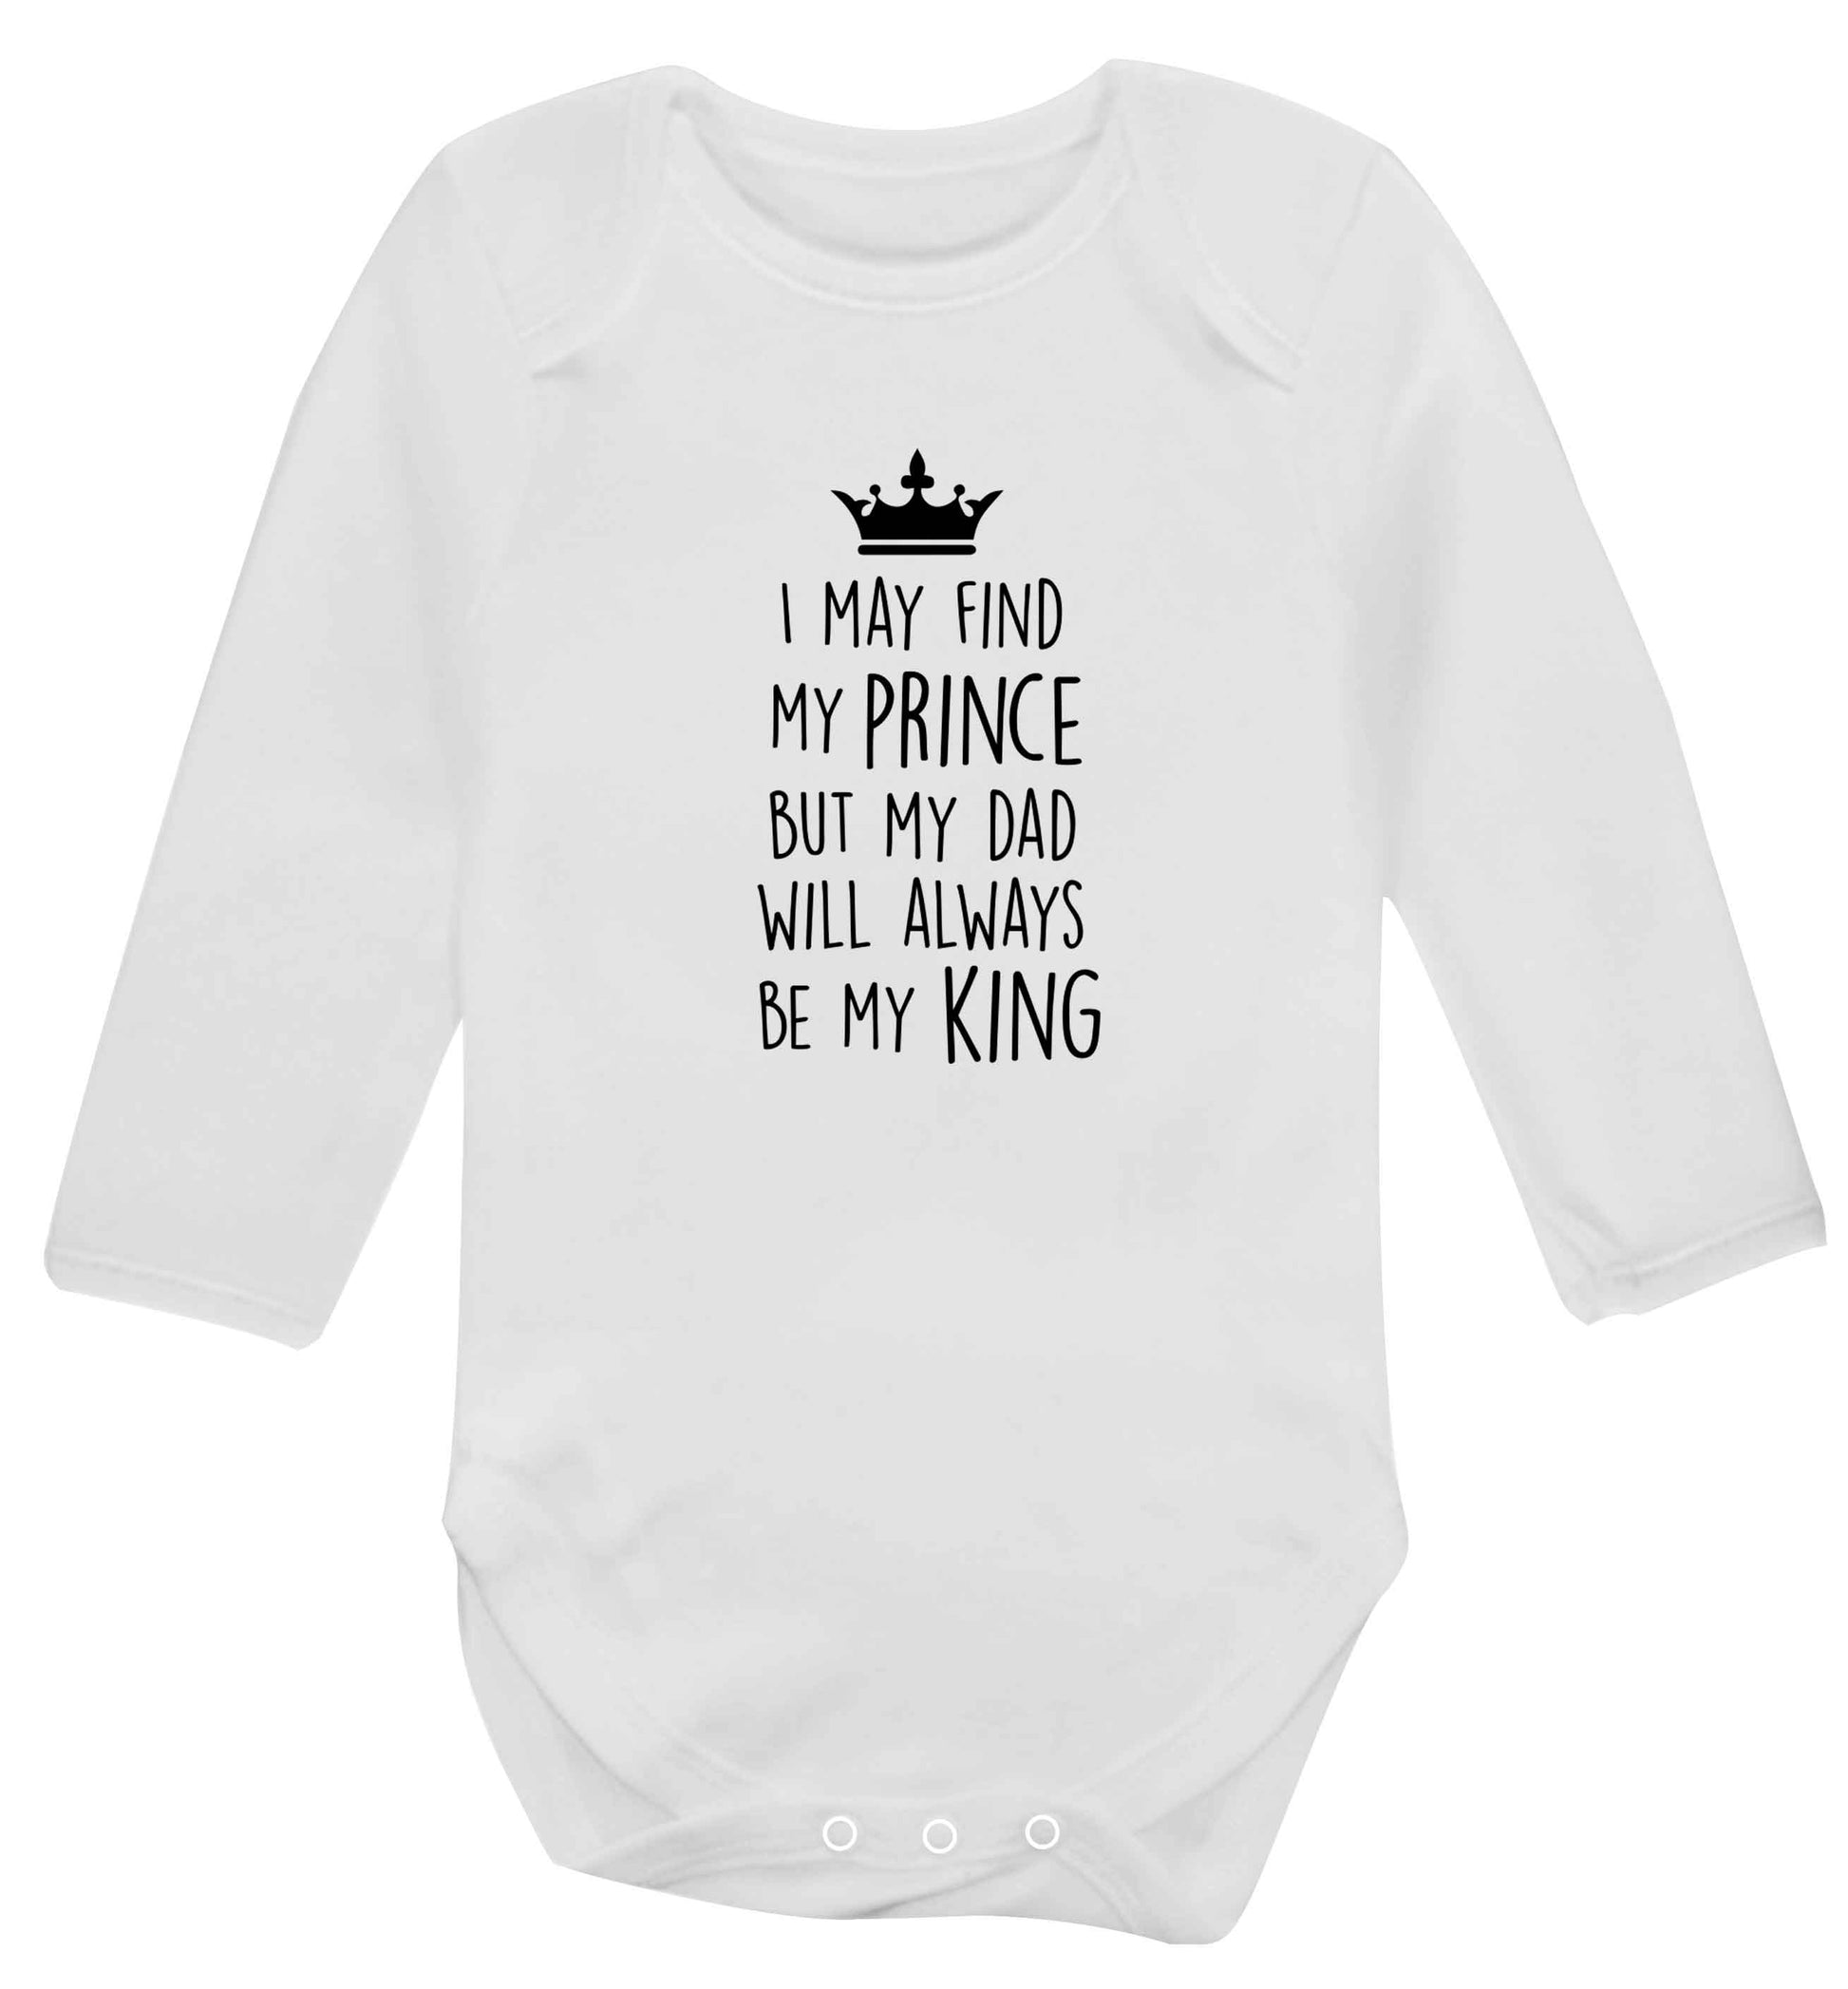 I may find my prince but my dad will always be my king baby vest long sleeved white 6-12 months